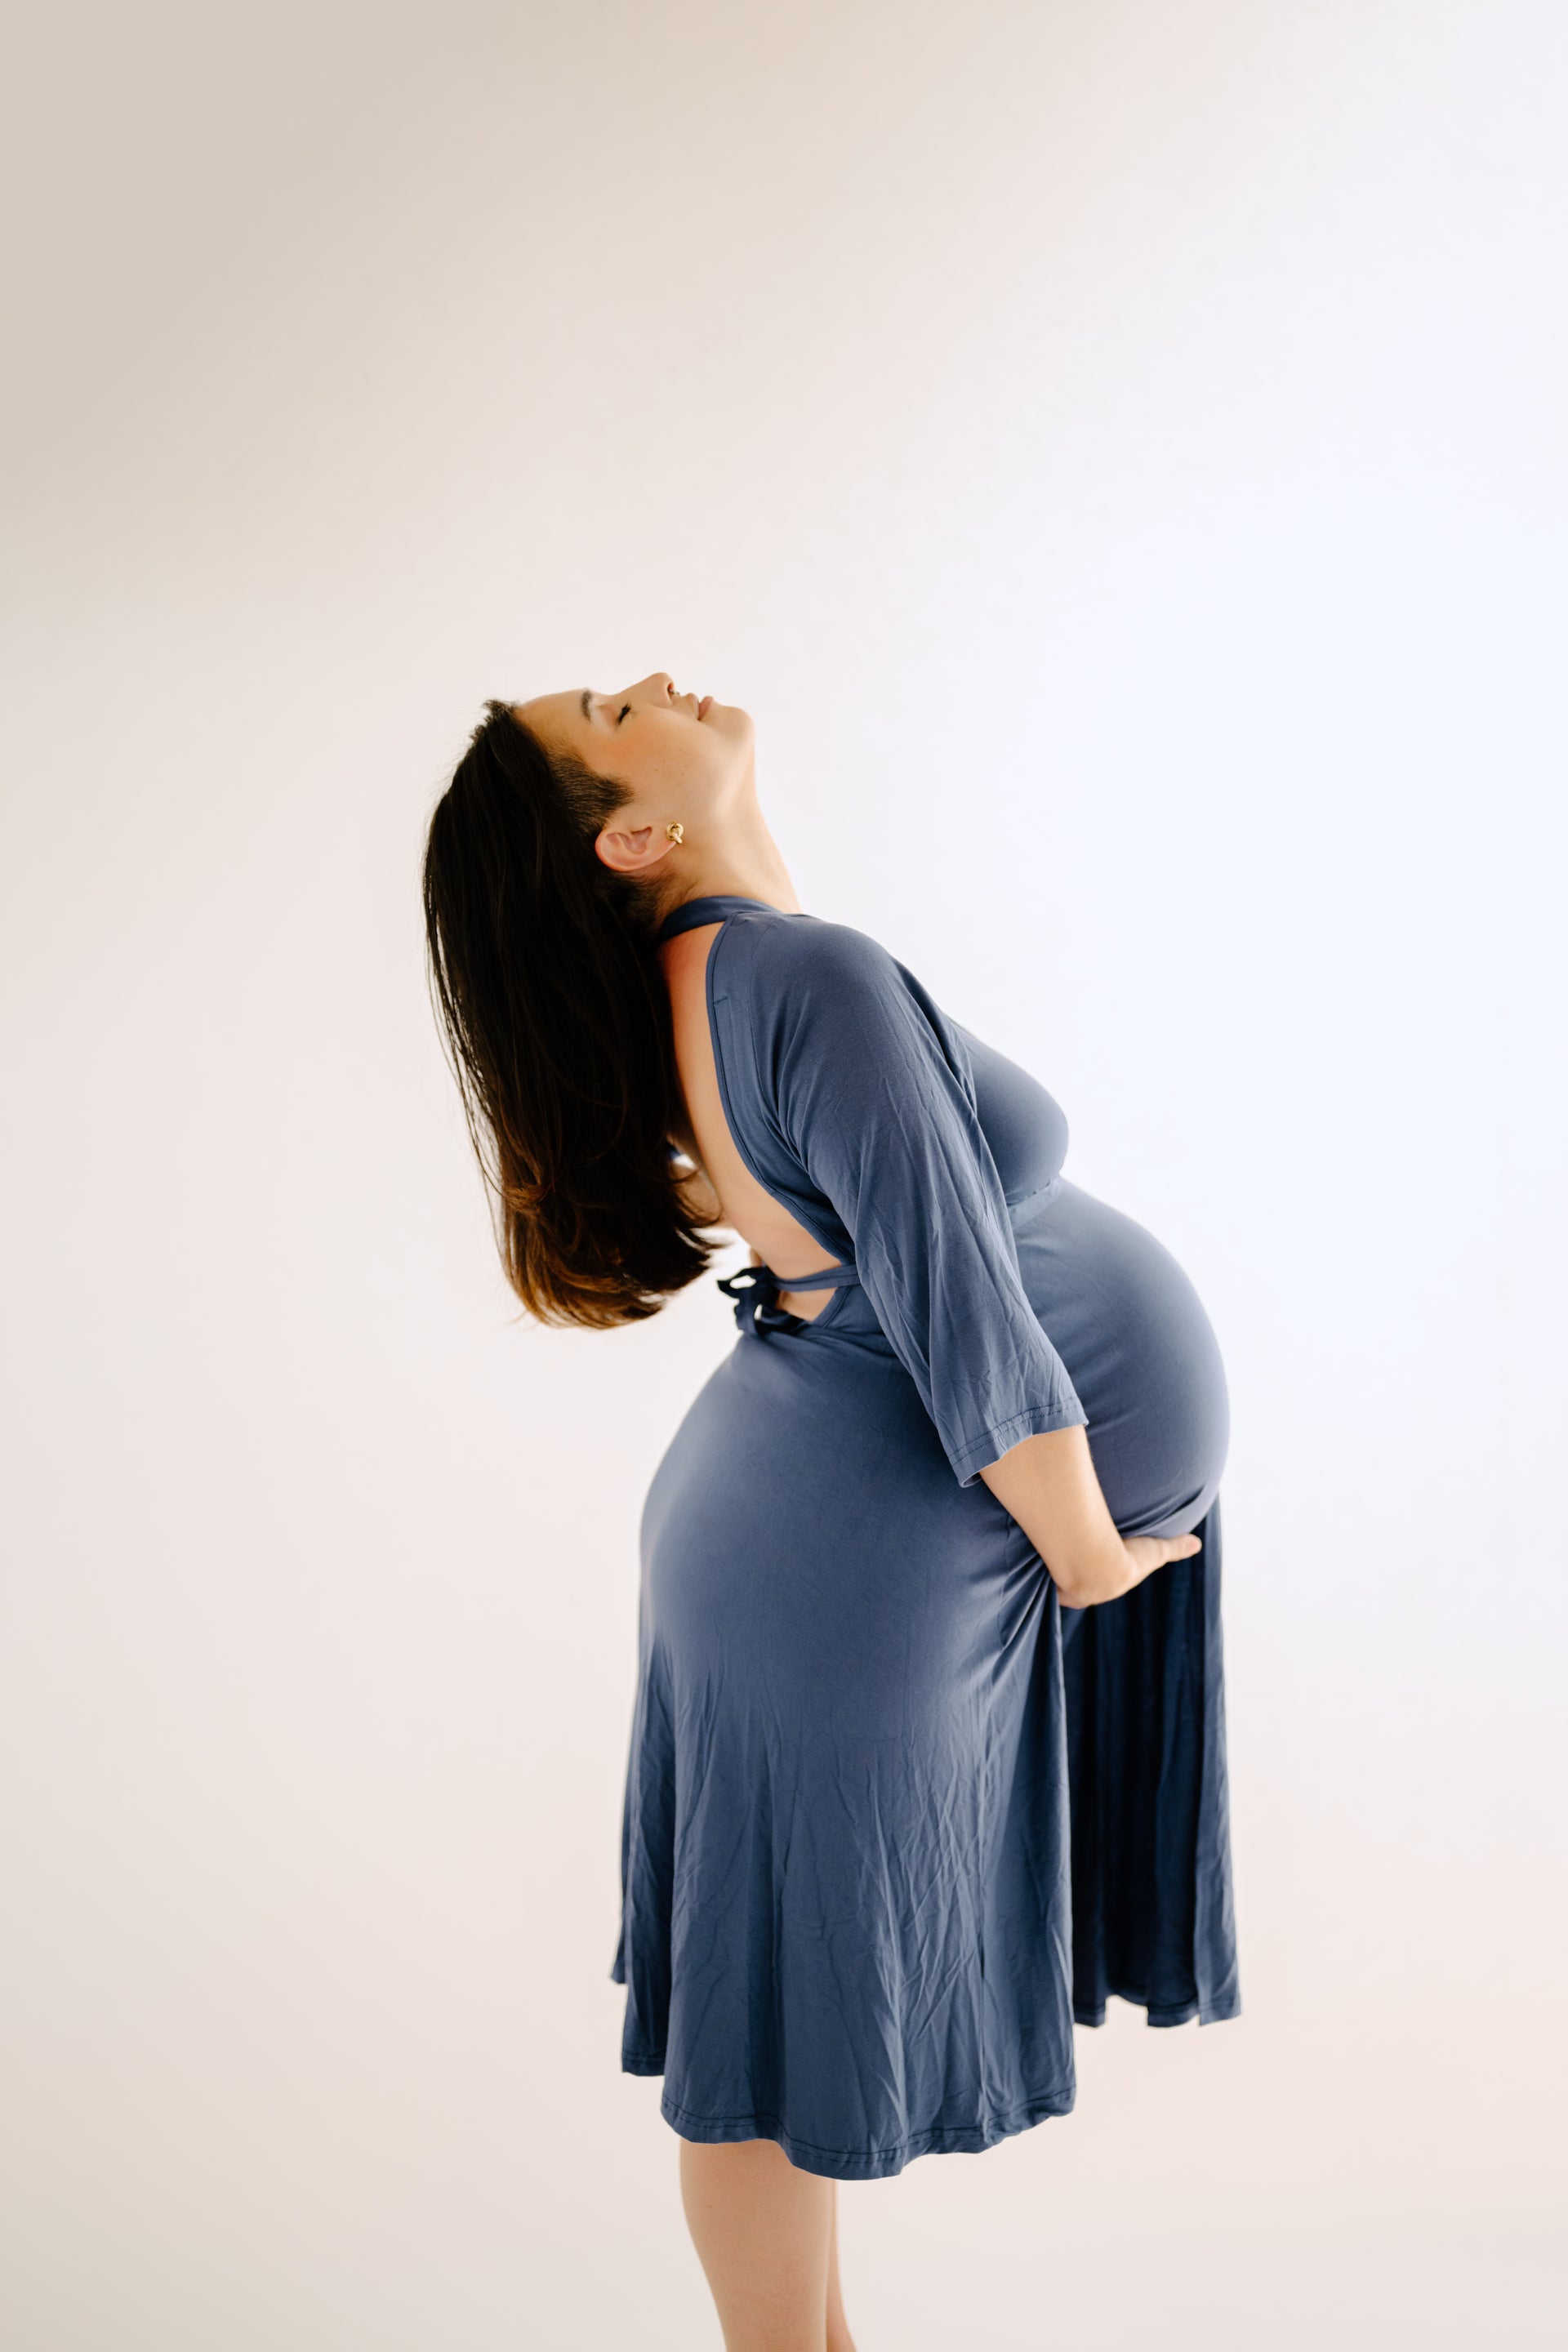 Stylish, comfortable birth gowns, bump-friendly maternity – clothes Lila